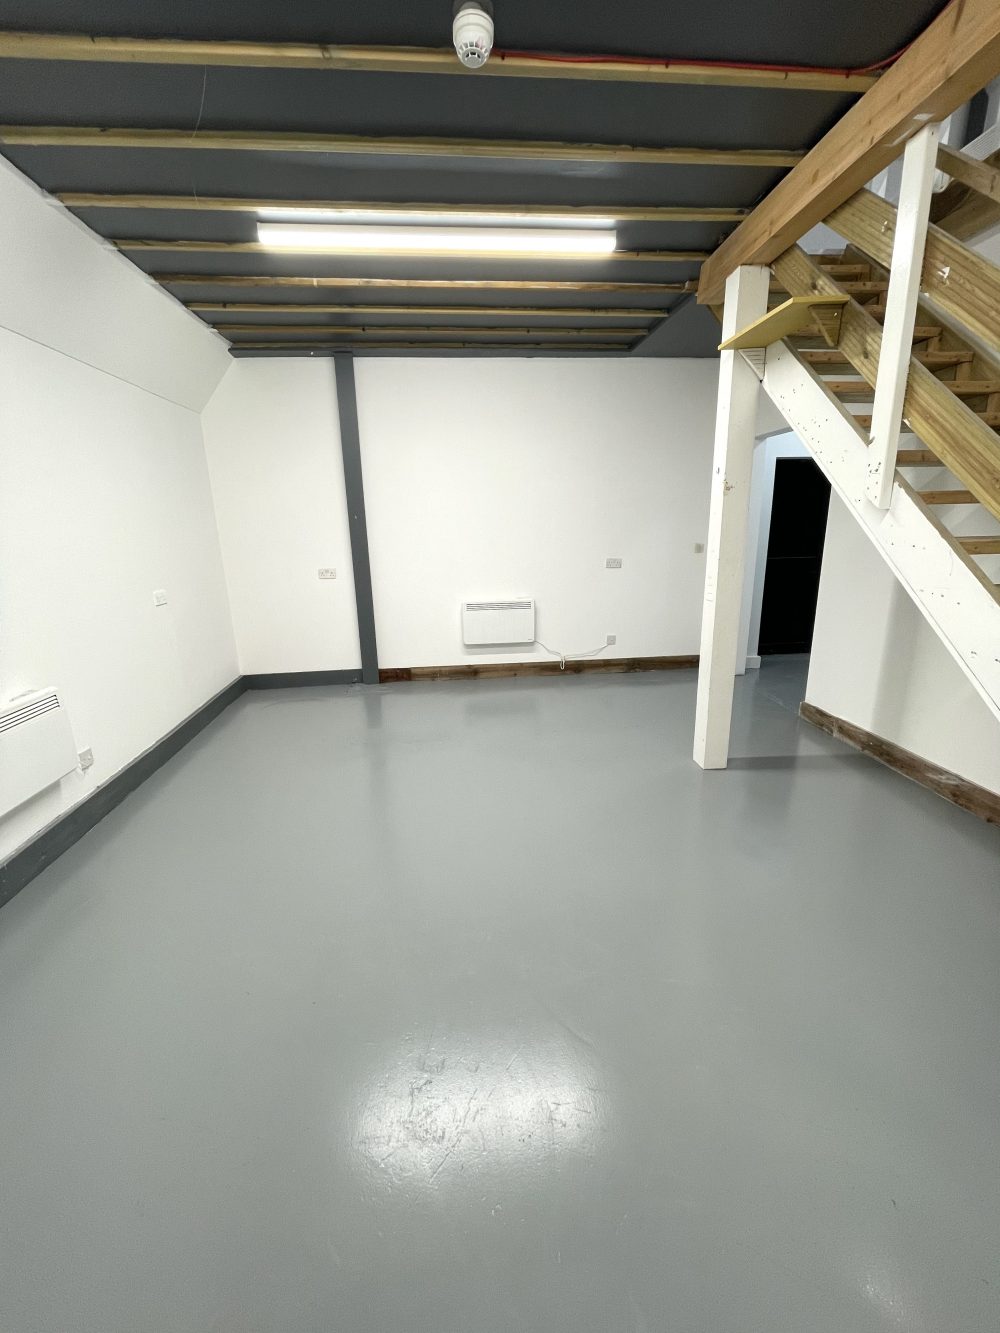 N15 Seven Sisters (Markfield Road) -Warehouse : Art Studio to rent for artists 6